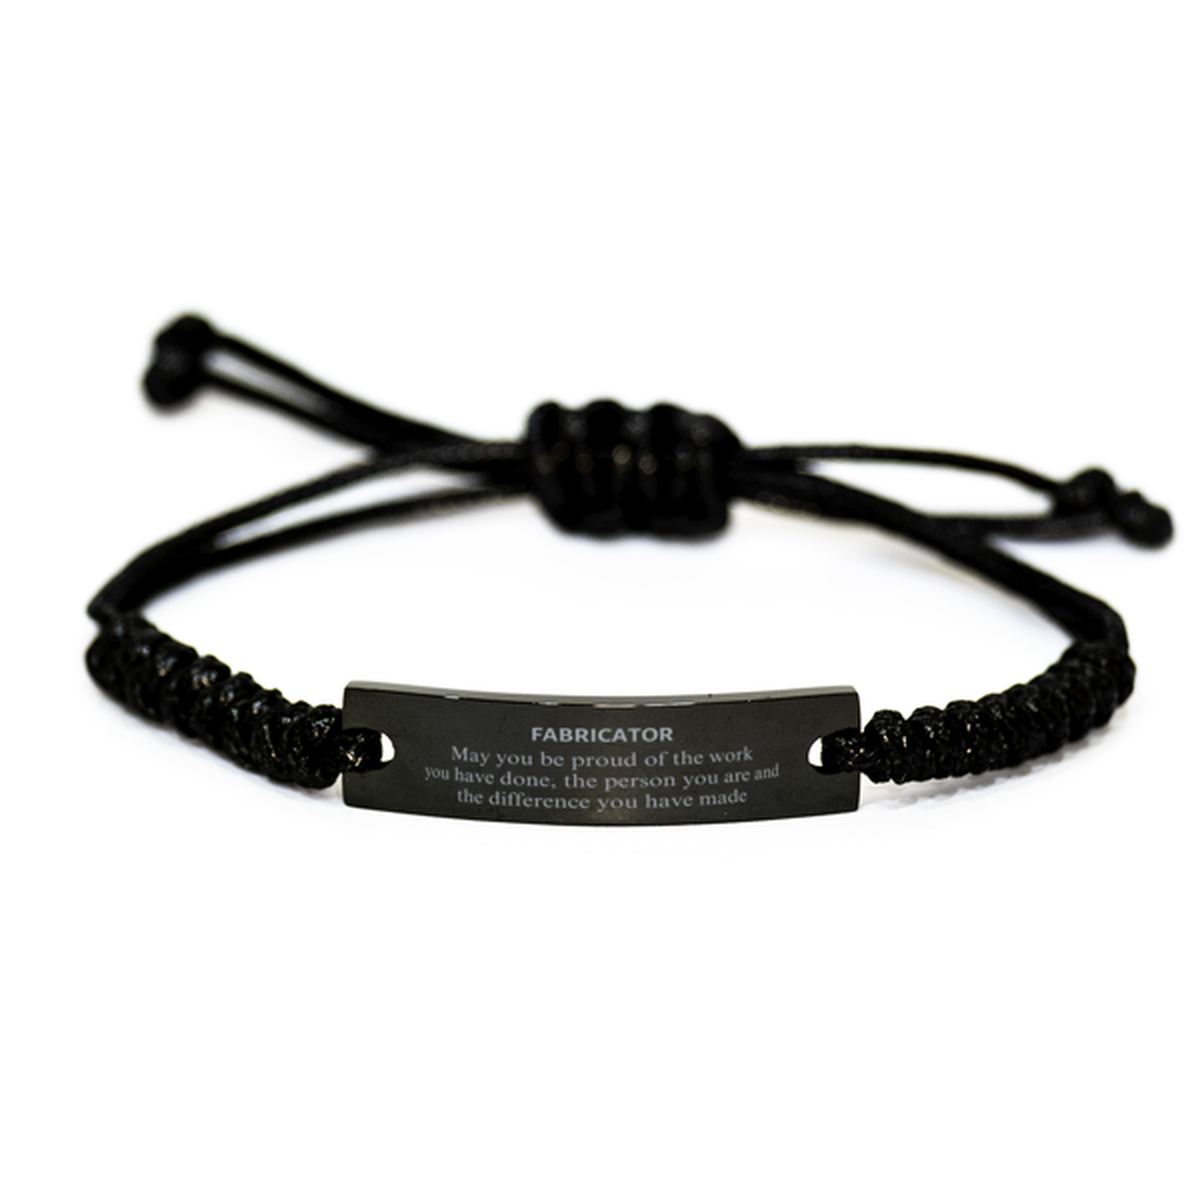 Fabricator May you be proud of the work you have done, Retirement Fabricator Black Rope Bracelet for Colleague Appreciation Gifts Amazing for Fabricator